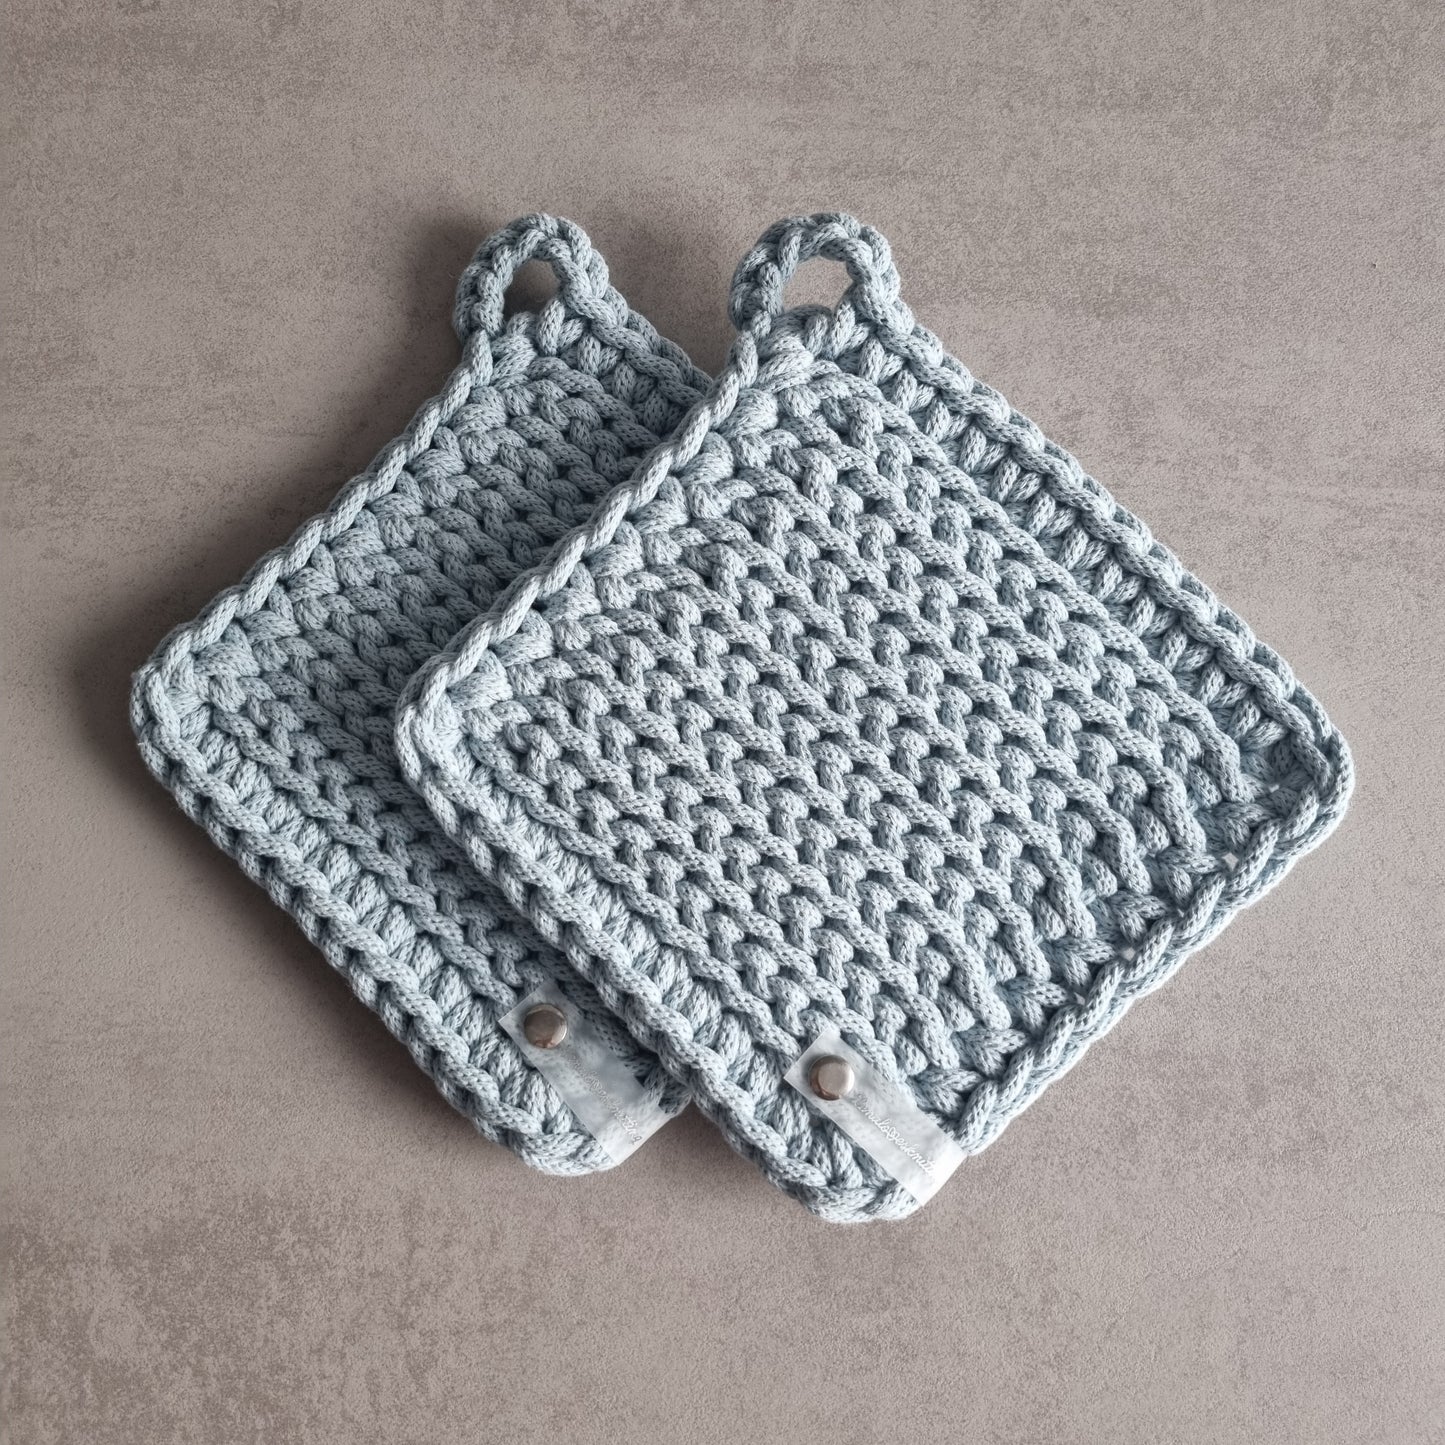 Set of 2 crocheted pot holders pot coasters made from recycled cotton coasters for the kitchen